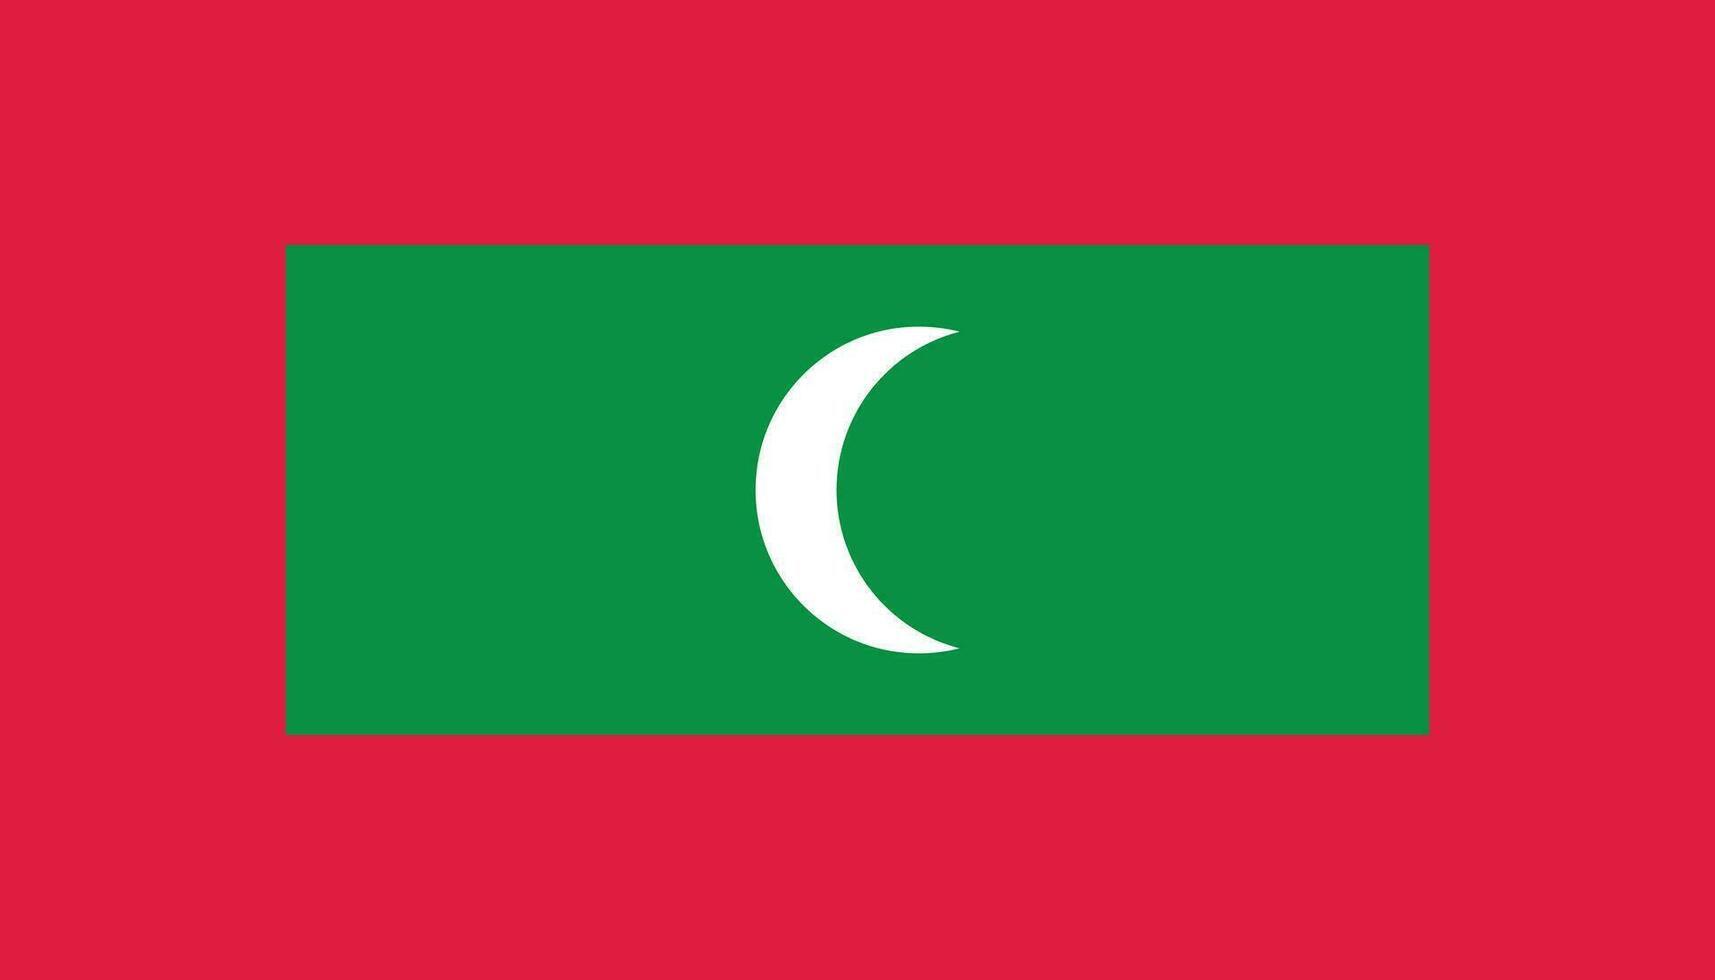 Maldives flag icon in flat style. National sign vector illustration. Politic business concept.